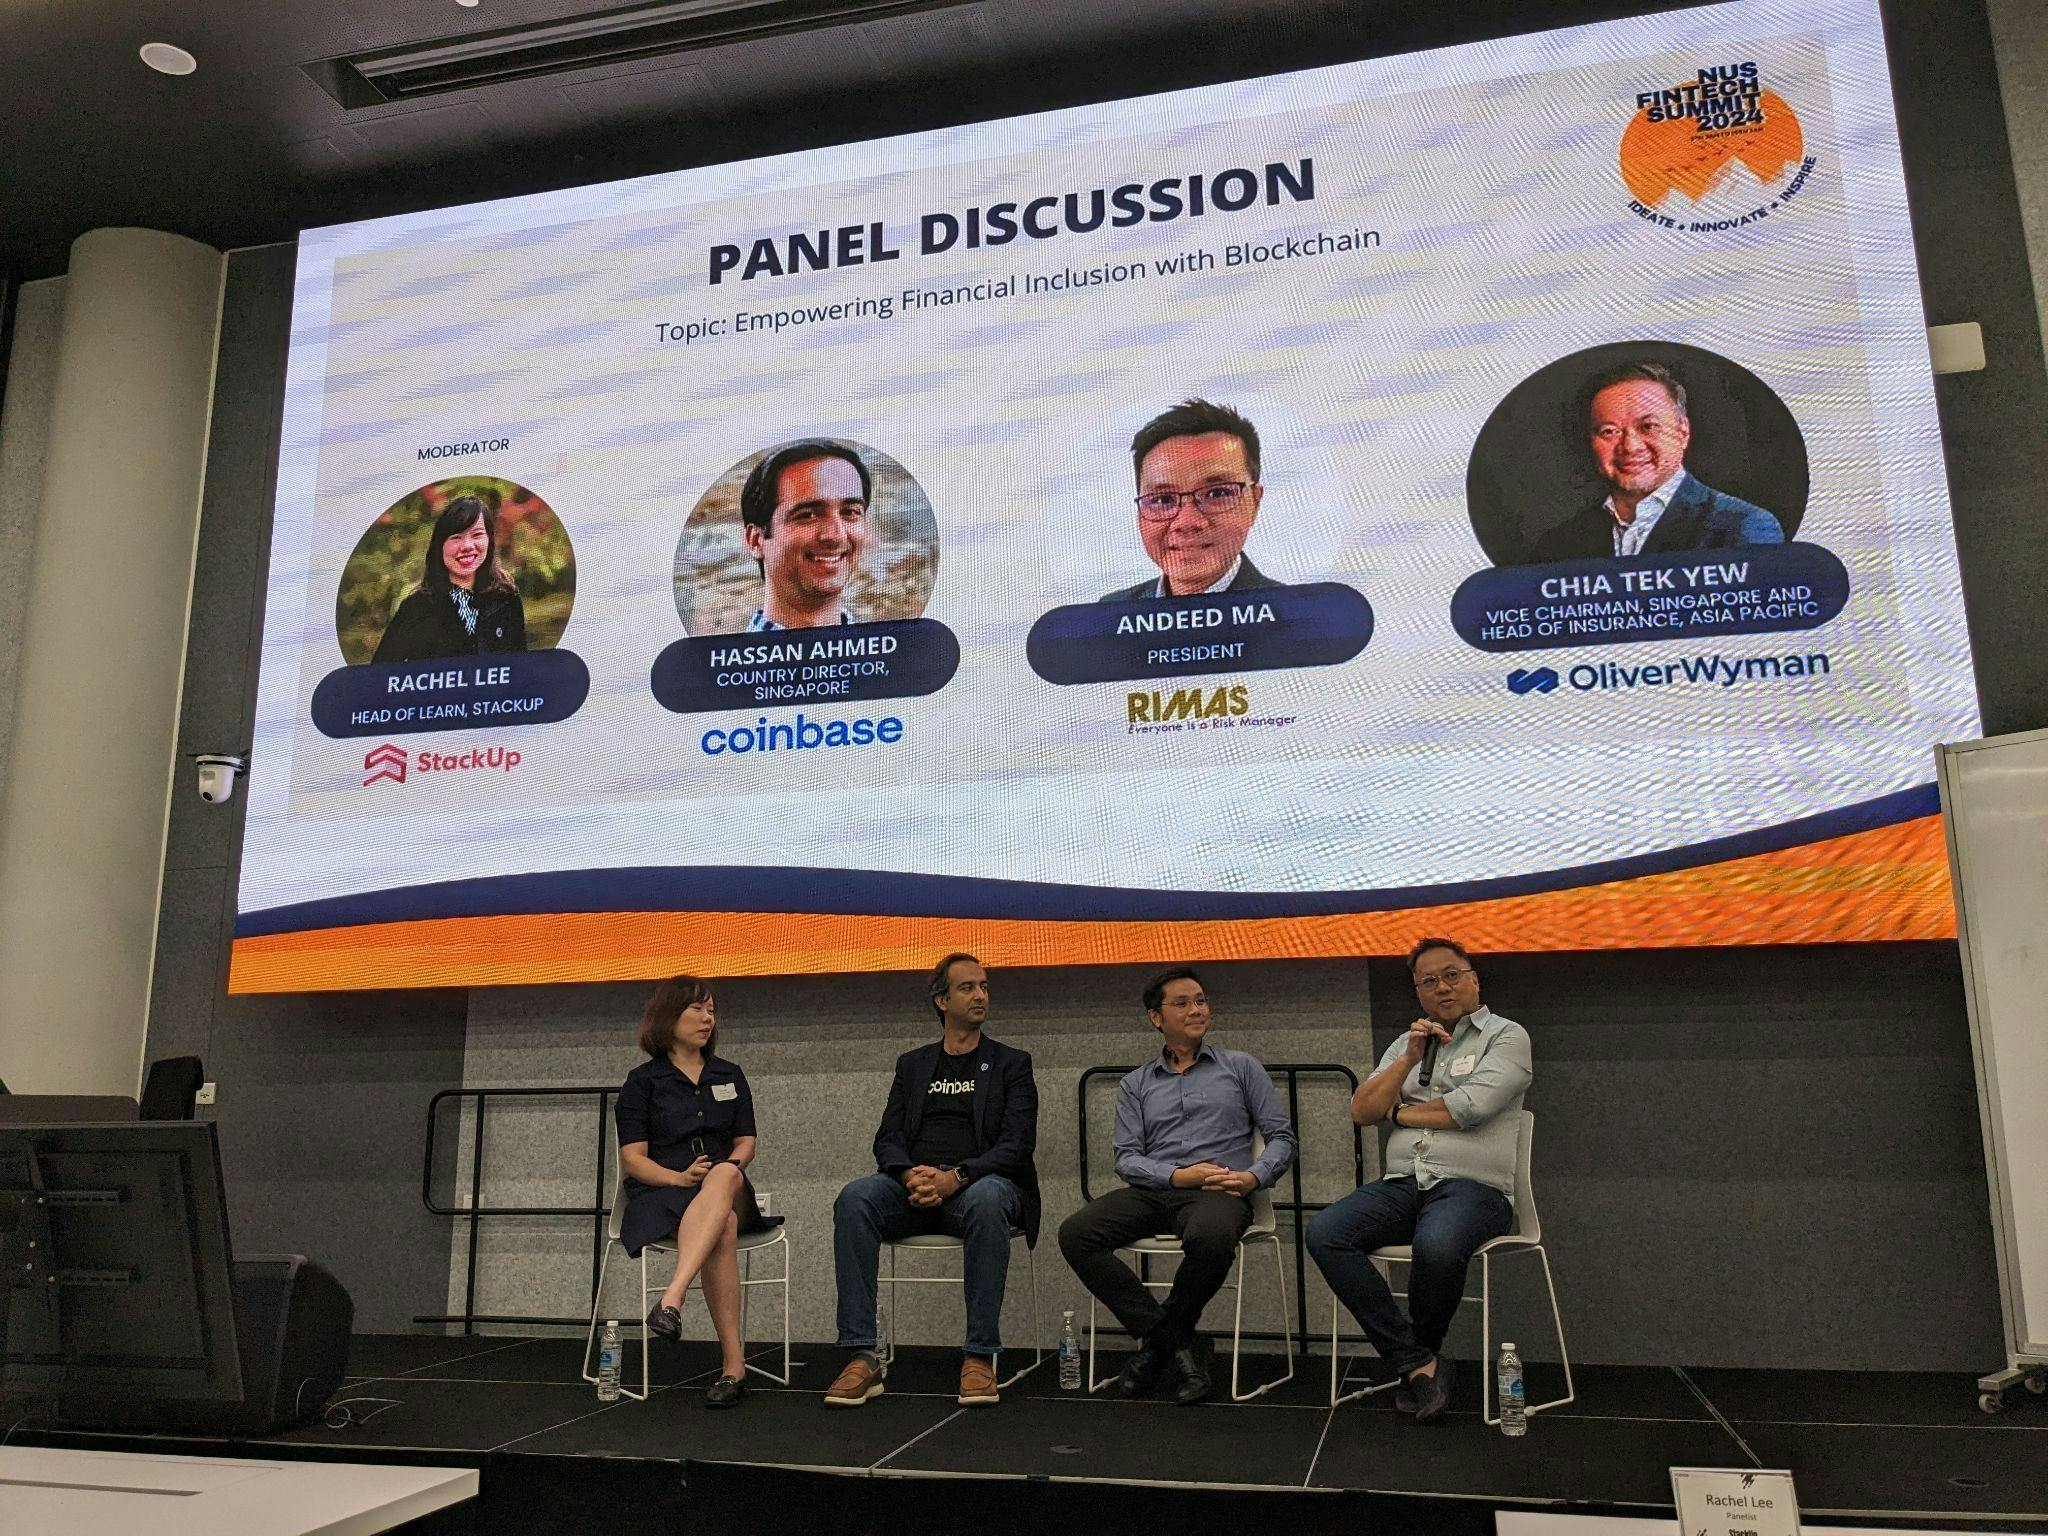 Panel Discussions on Opening Day